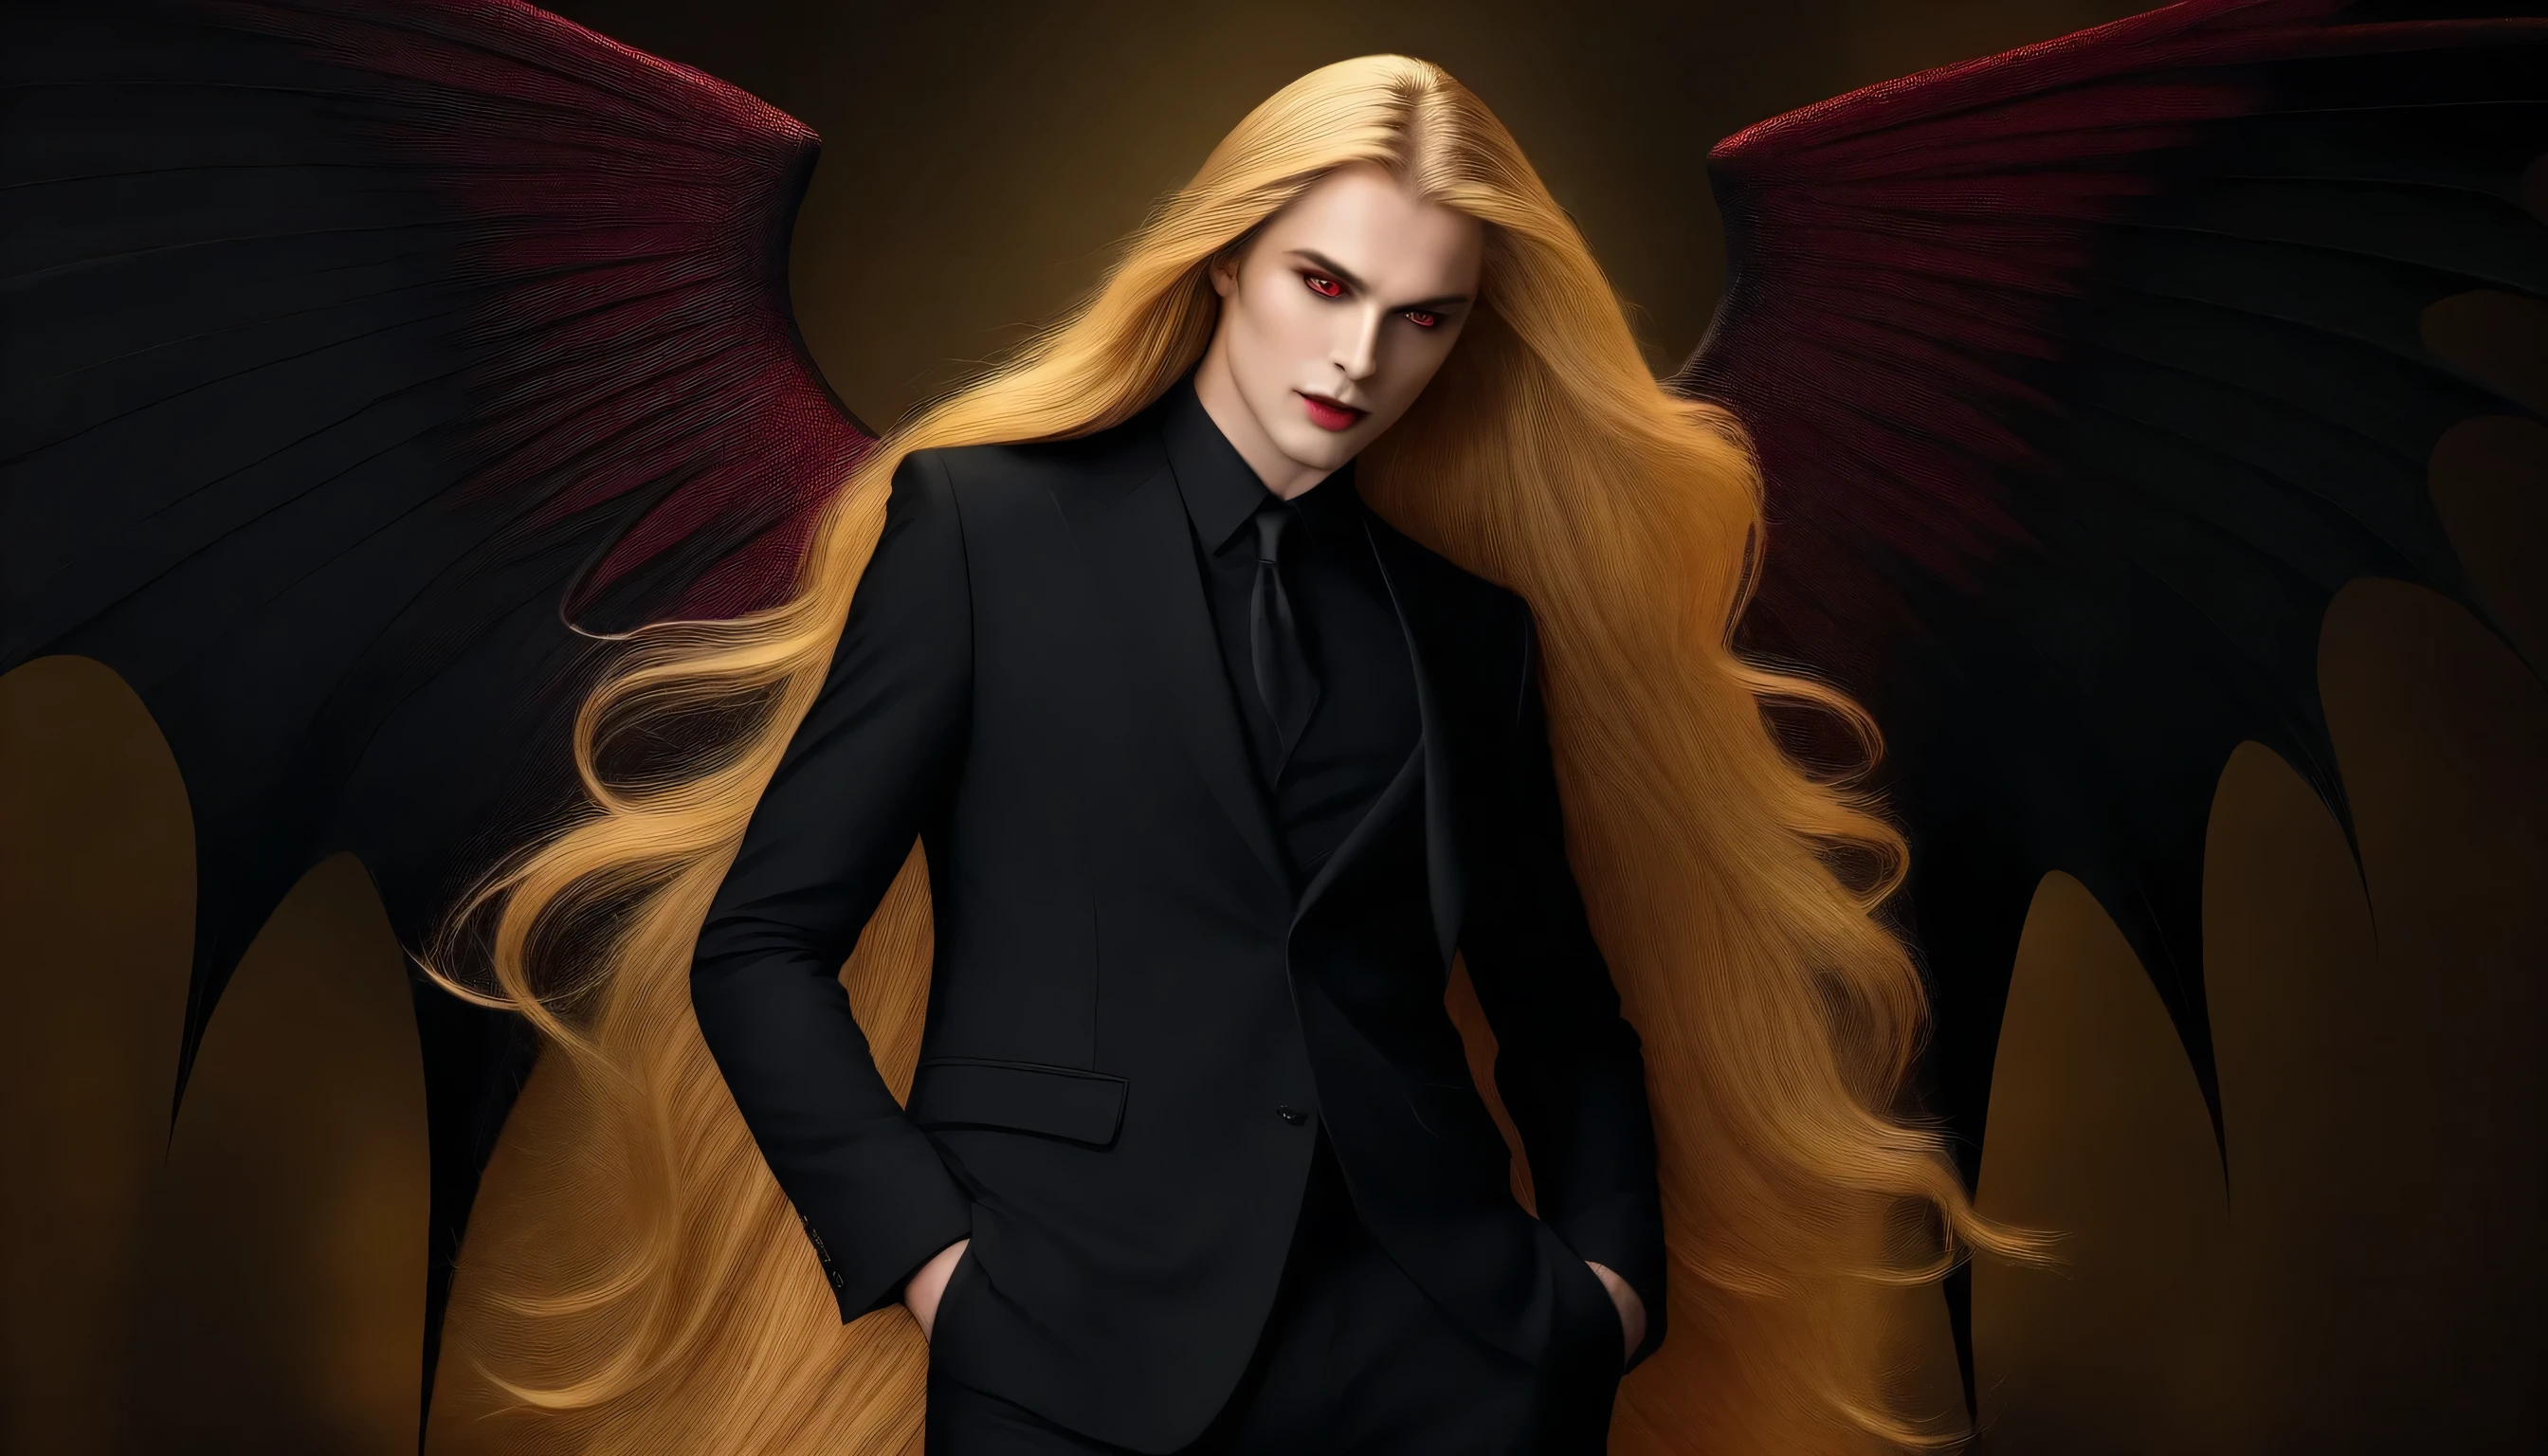 Only 1 woman, Very handsome woman, golden hair with long hair style, red eyes, wear black suit and black wings, vampire vibes